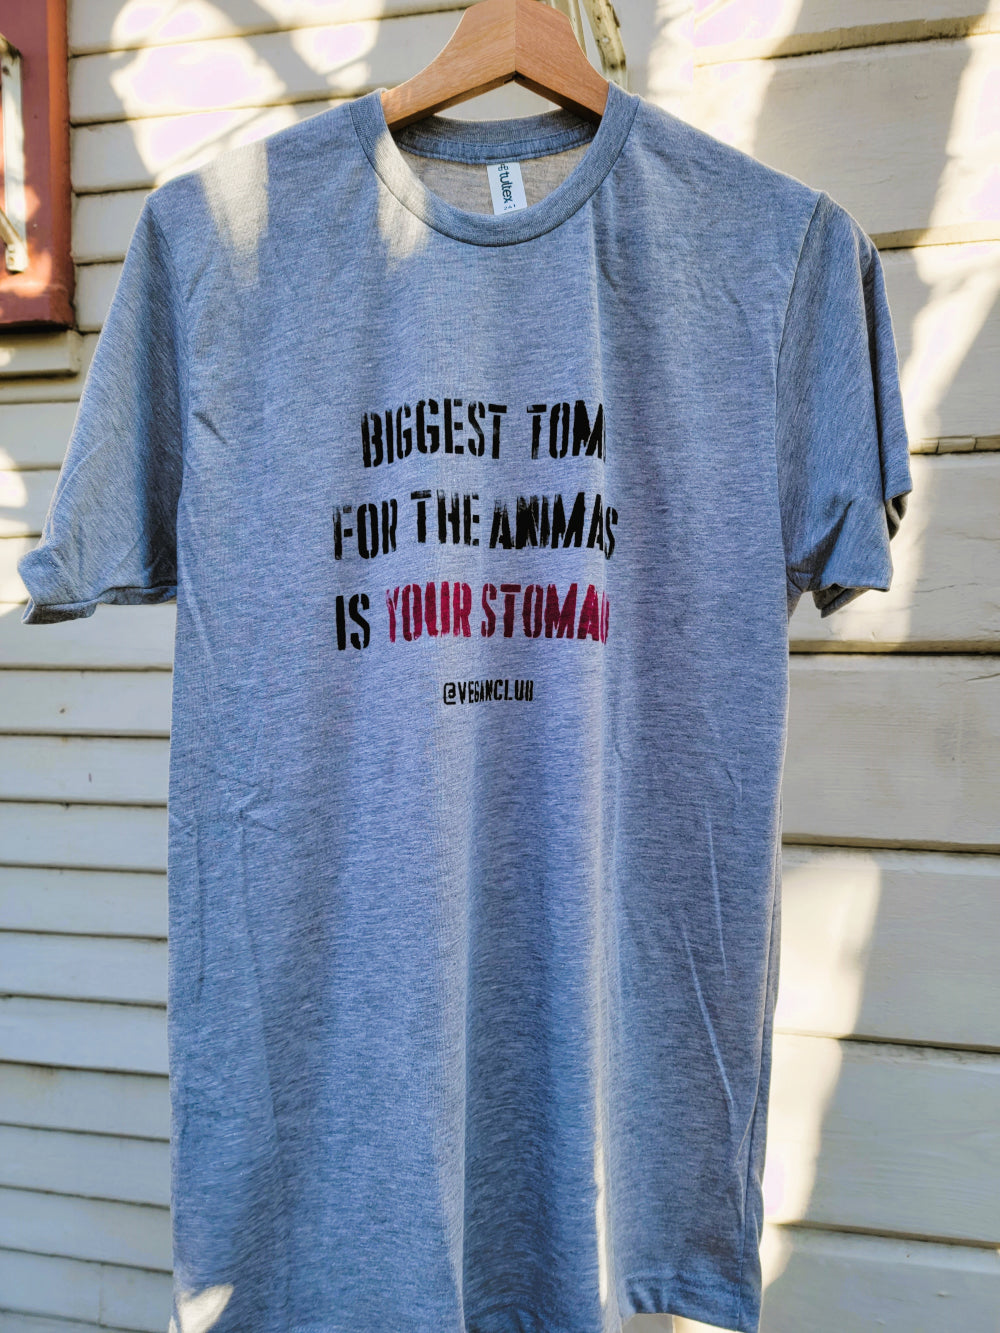 Biggest Tomb for the Animals is your Stomach T-shirt - New Design 2022